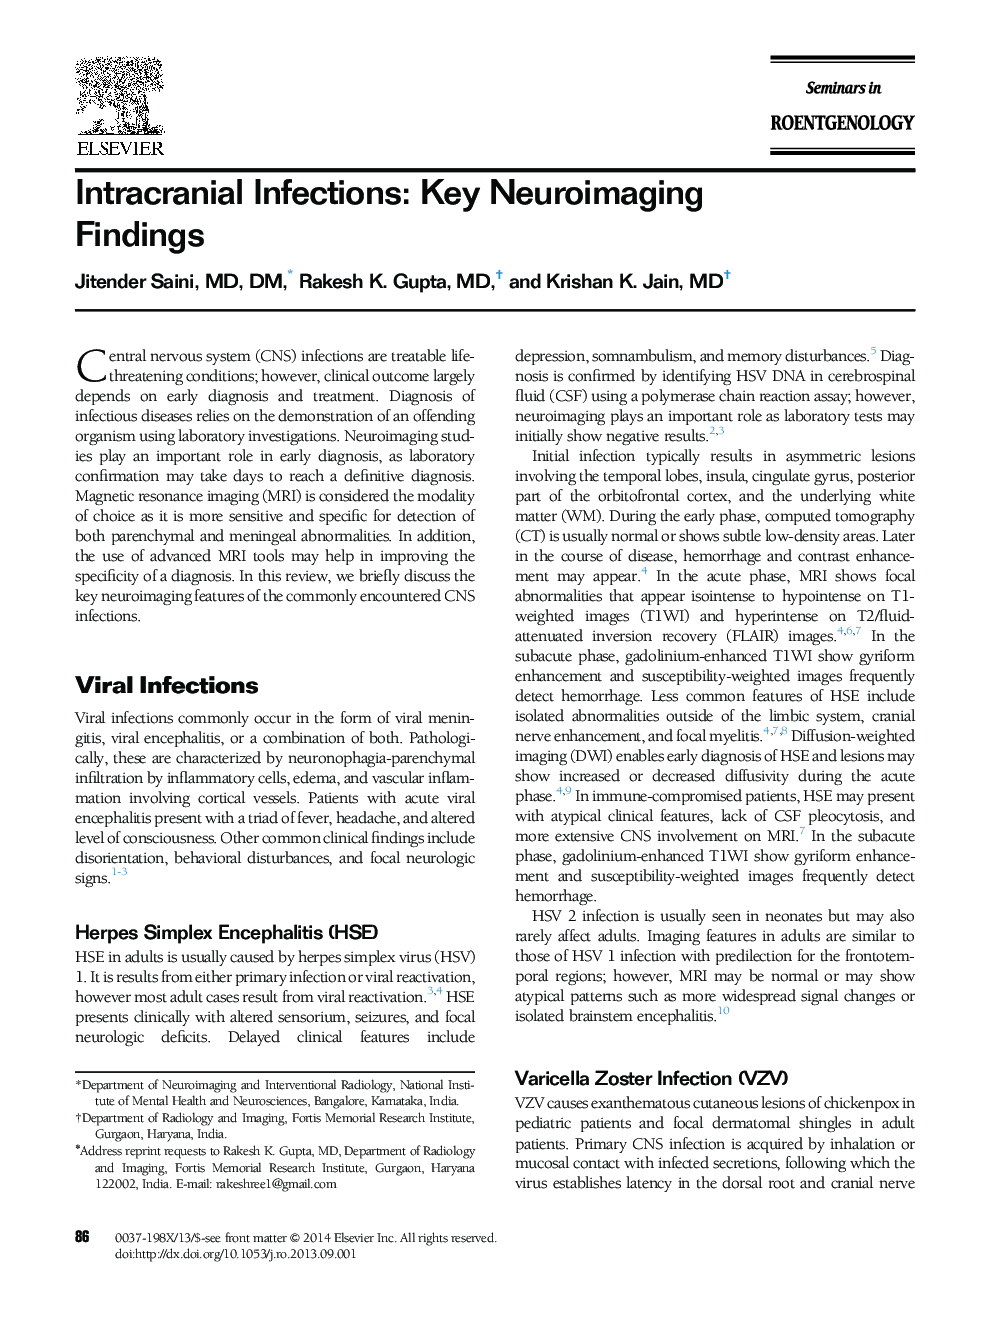 Intracranial Infections: Key Neuroimaging Findings